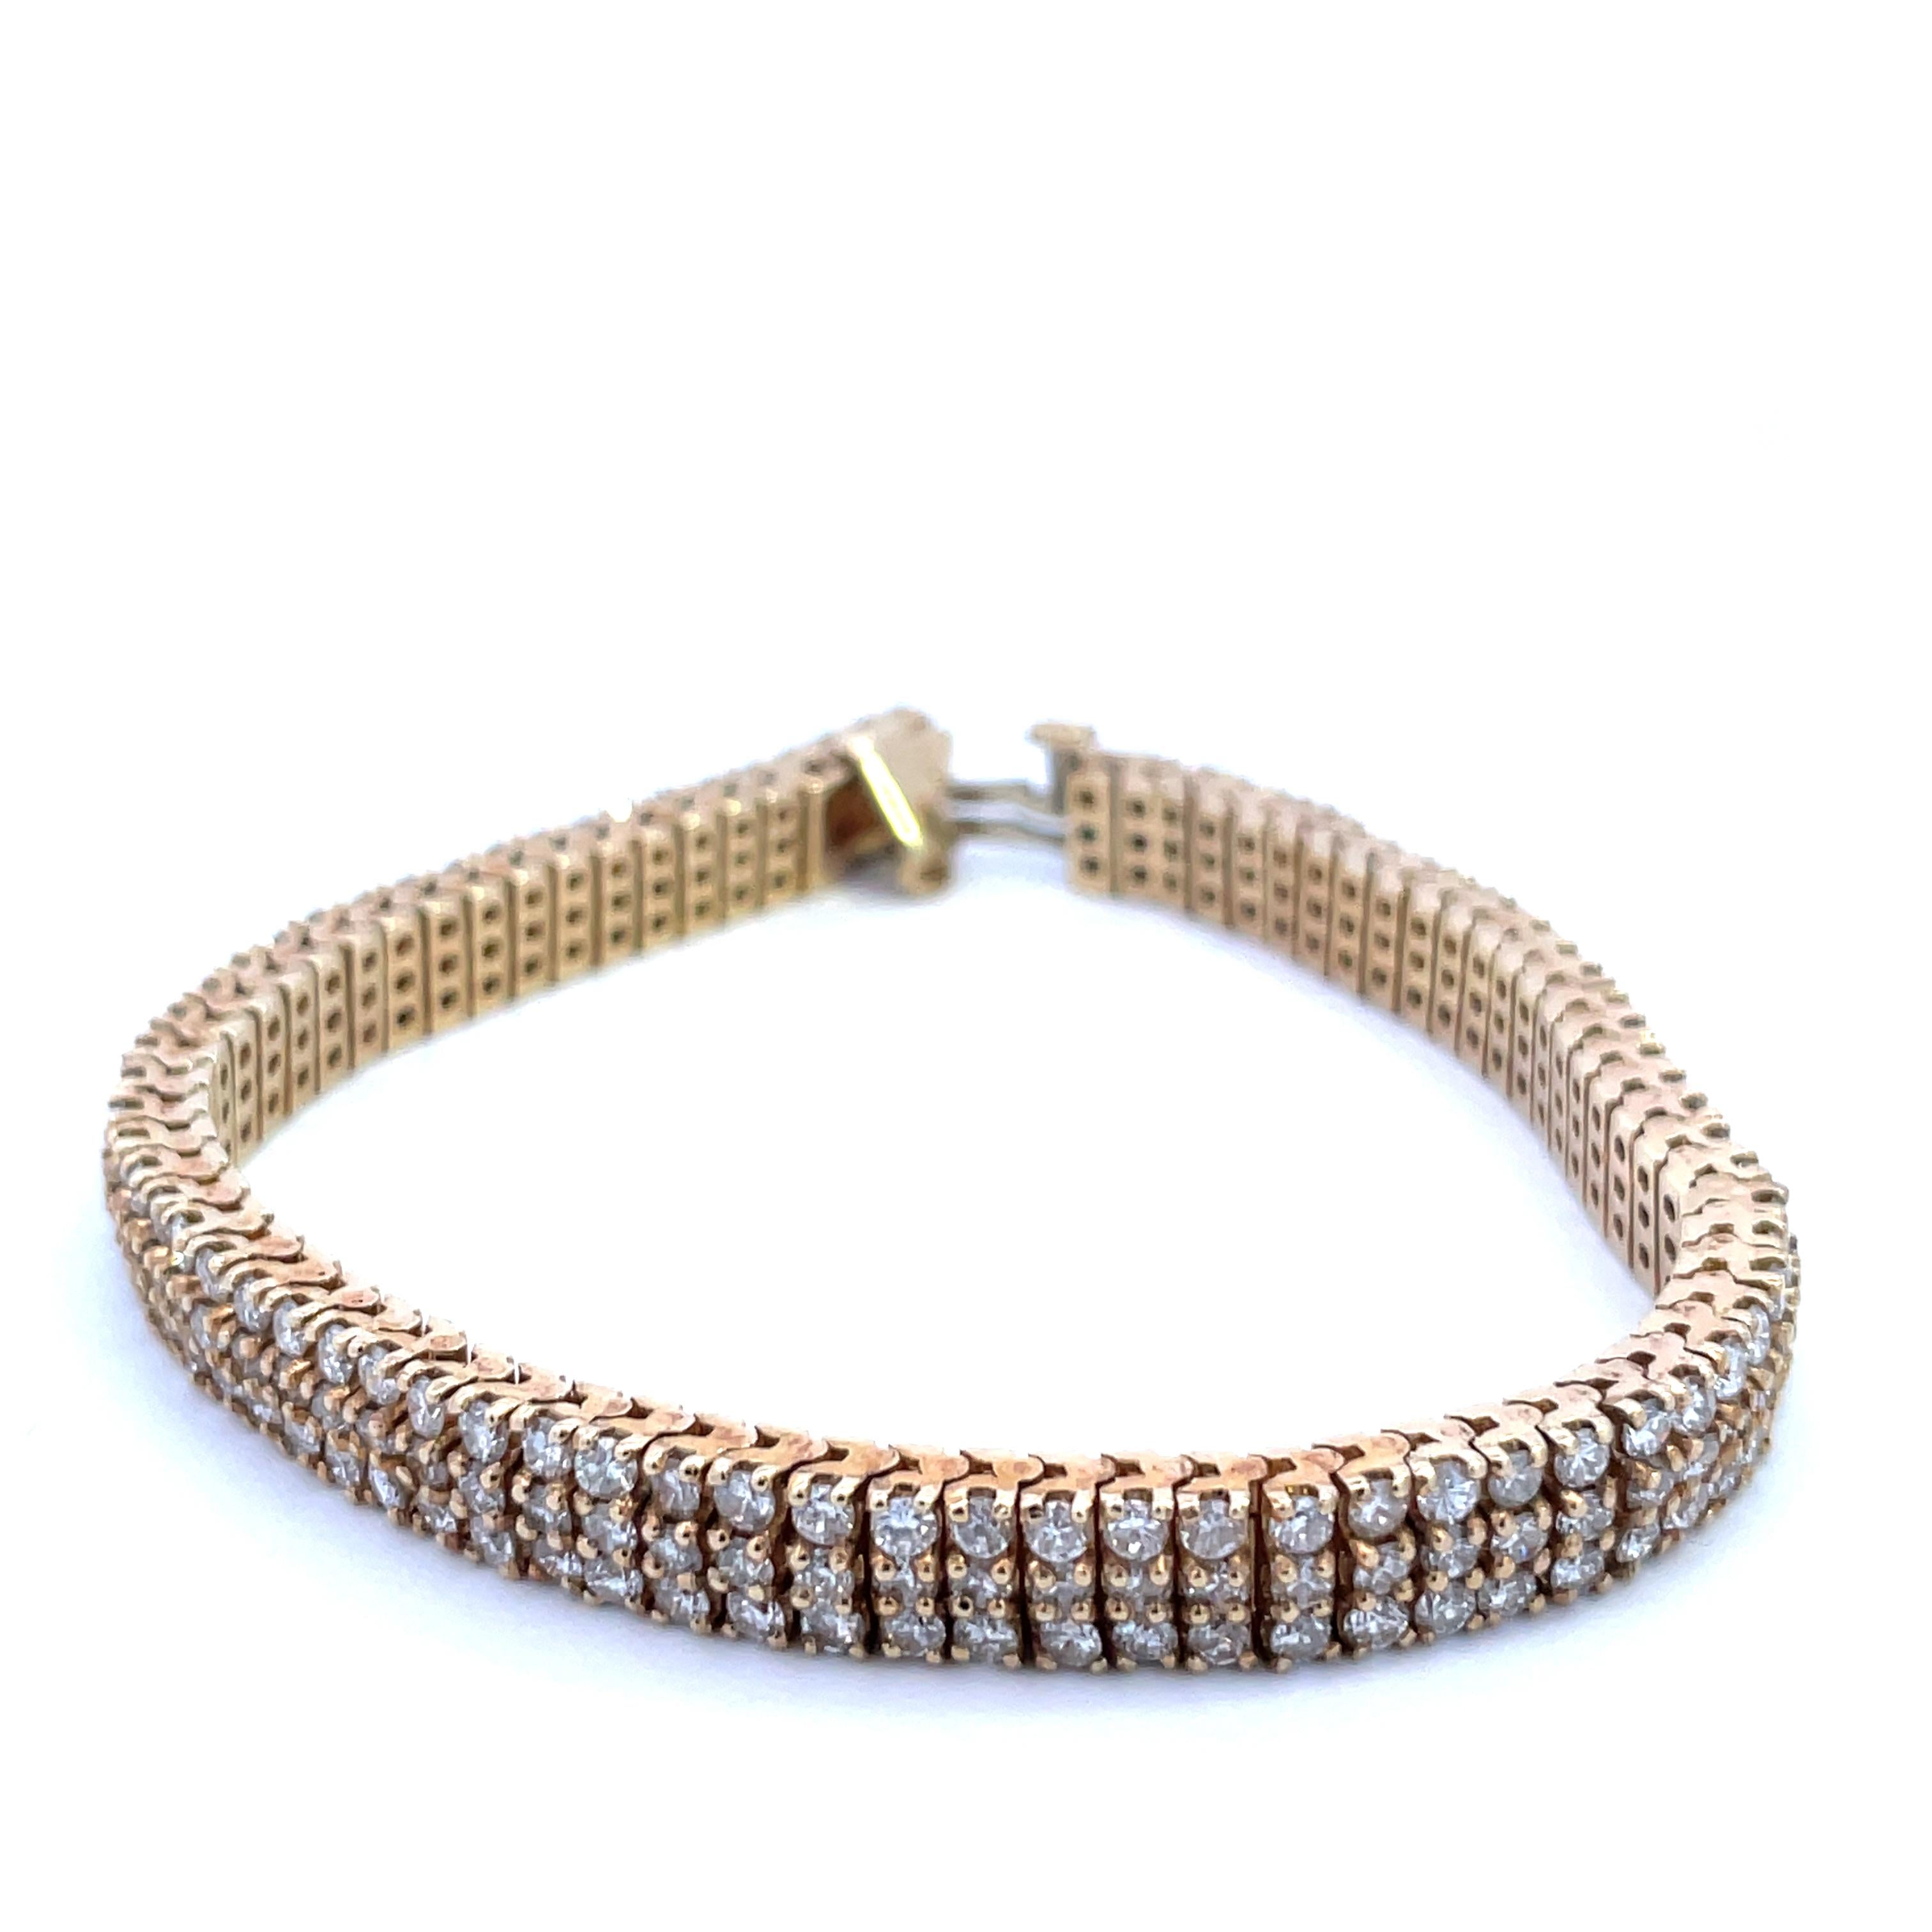 What an absolutely gorgeous 14K yellow gold triple- row diamond studded bracelet! This show-stopping bracelet features 3 rows of glimmering diamonds set in 14K yellow gold. Can you imagine showing this bracelet off to your friends? Their eyes